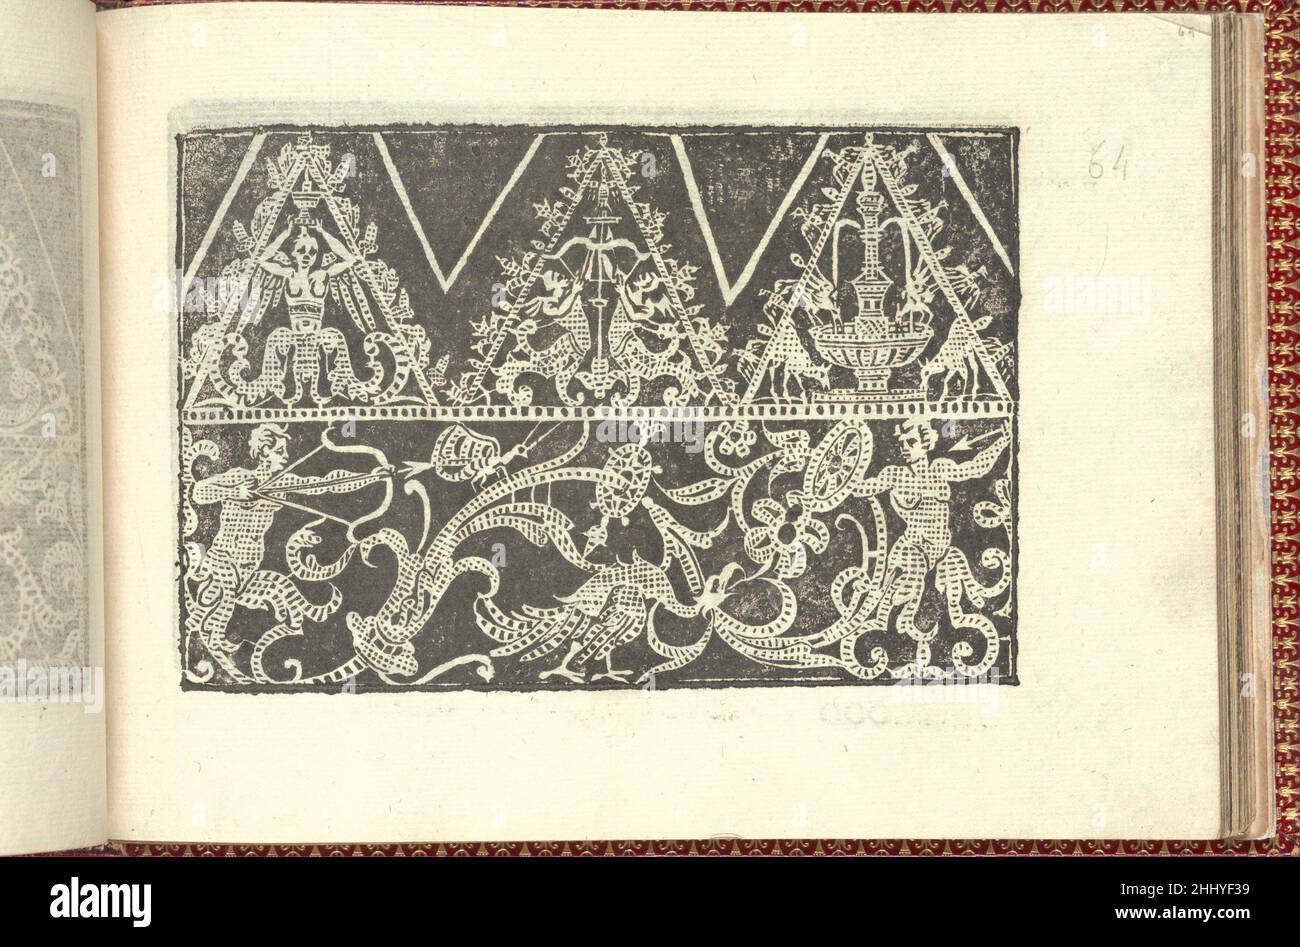 Corona delle Nobili et Virtuose Donne: Libro I-IV, page 64 (recto) 1601 Cesare Vecellio Italian Published by Cesare Vecellio, Italian, Pieve di Cadore 1521-1601 Venice, Venice.From top to bottom, and left to right:Design composed of 2 horizontal registers. Top register is decorated with 3 triangles: left triangle is ornamented with a composite female, bird, and plant creature holding a candle on her head, middle triangle is ornamented with 2 composite man, bird, and plant creatures shooting an arrow at a bird, right triangle is ornamented with a fountain from which 2 birds and 2 deer drink. Bo Stock Photo